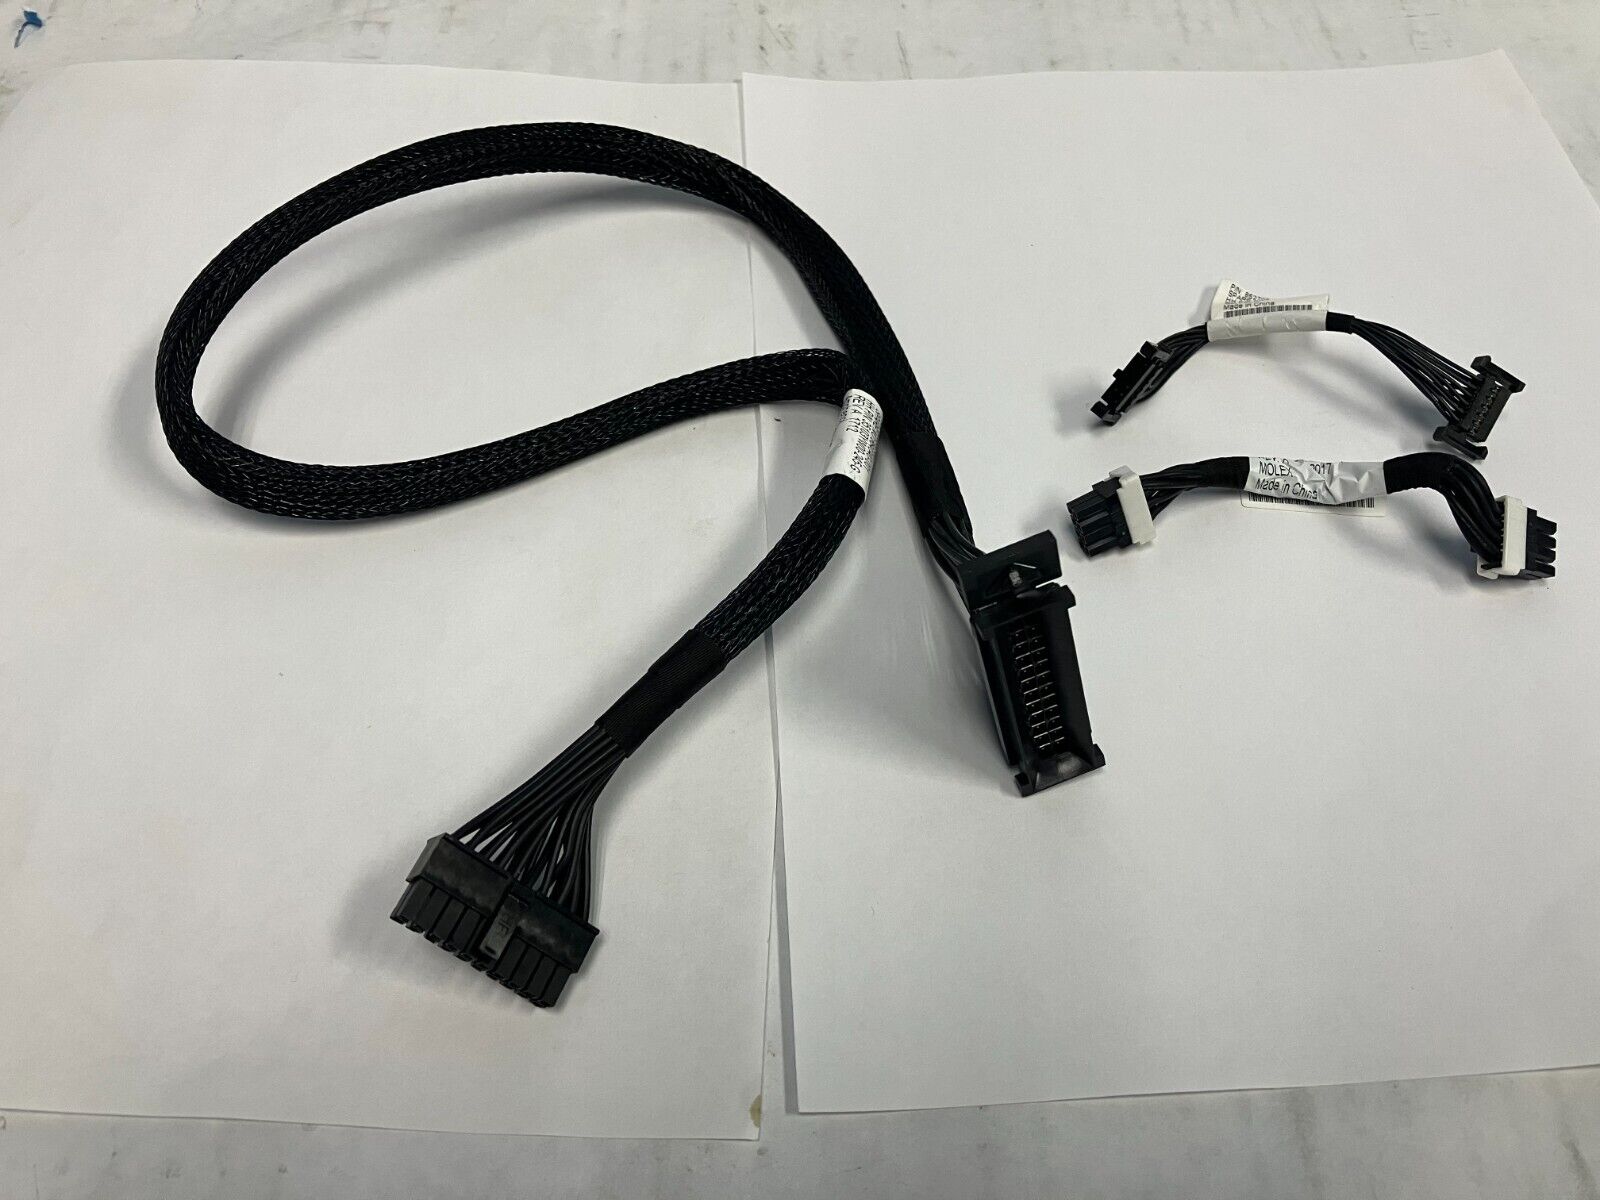 HPe 864040-001 K6000 Gen10 Chassis Fan Cable